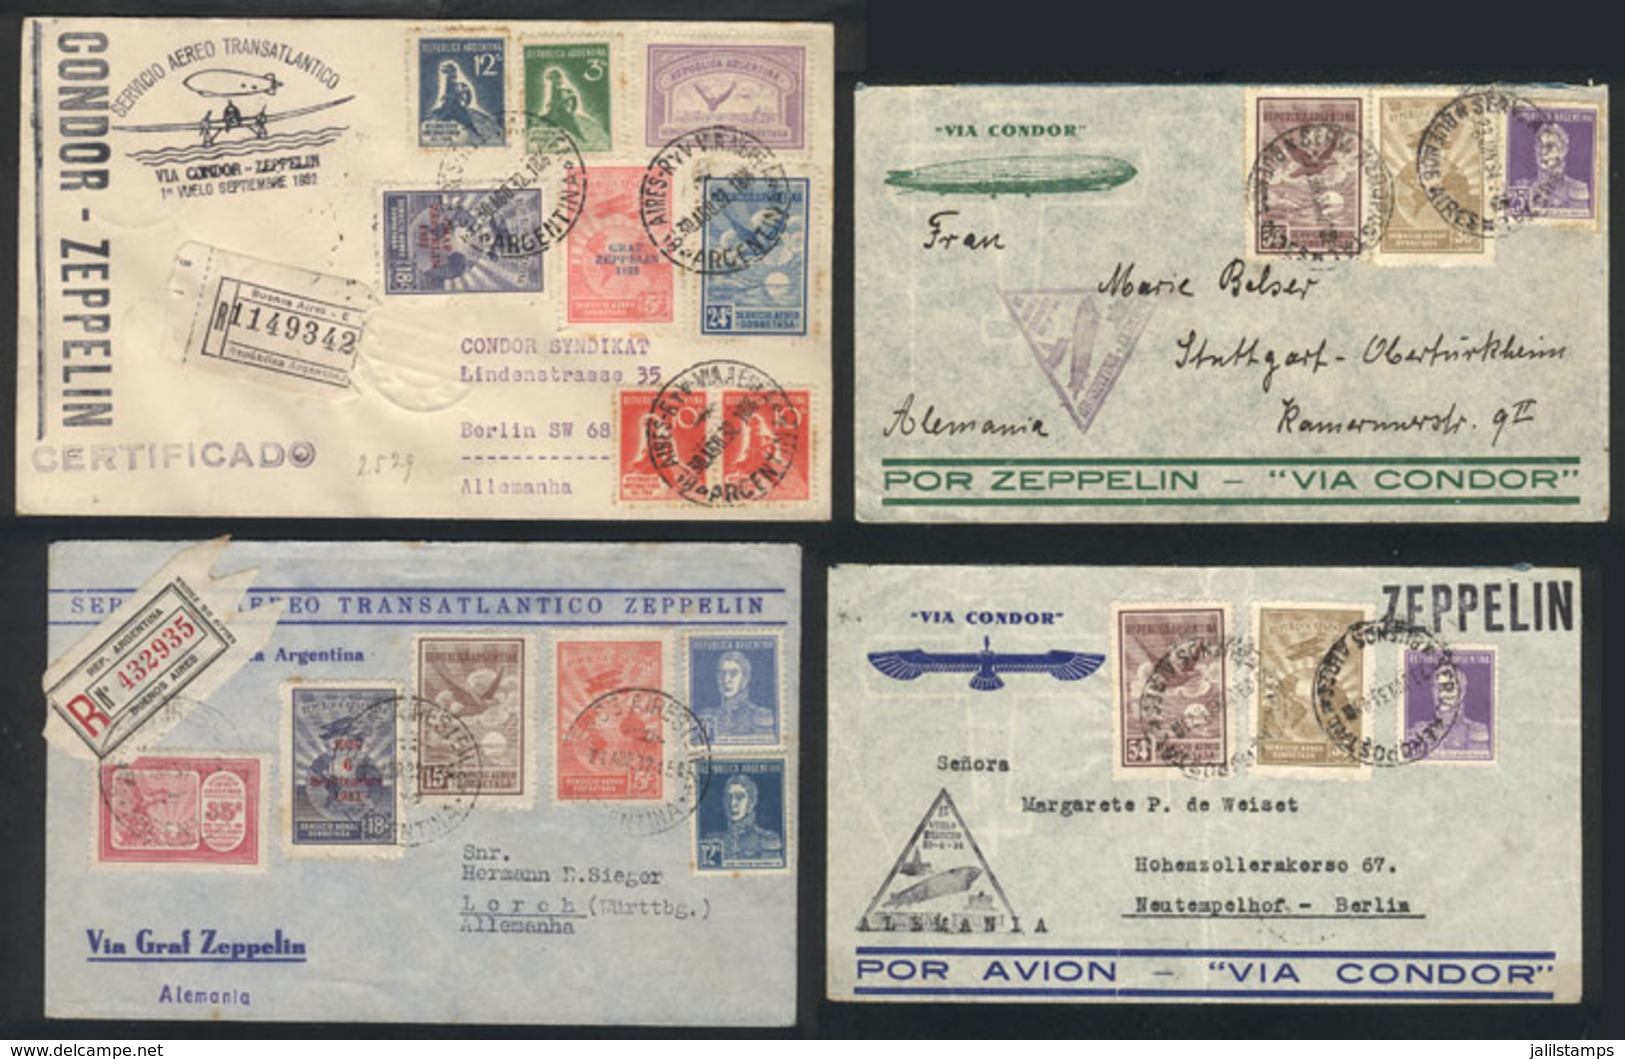 ARGENTINA: 4 Covers Flown By ZEPPELIN To Germany In 1932 And 1934, Nice Postages, With Special Handstamps Of The Flights - Prefilatelia